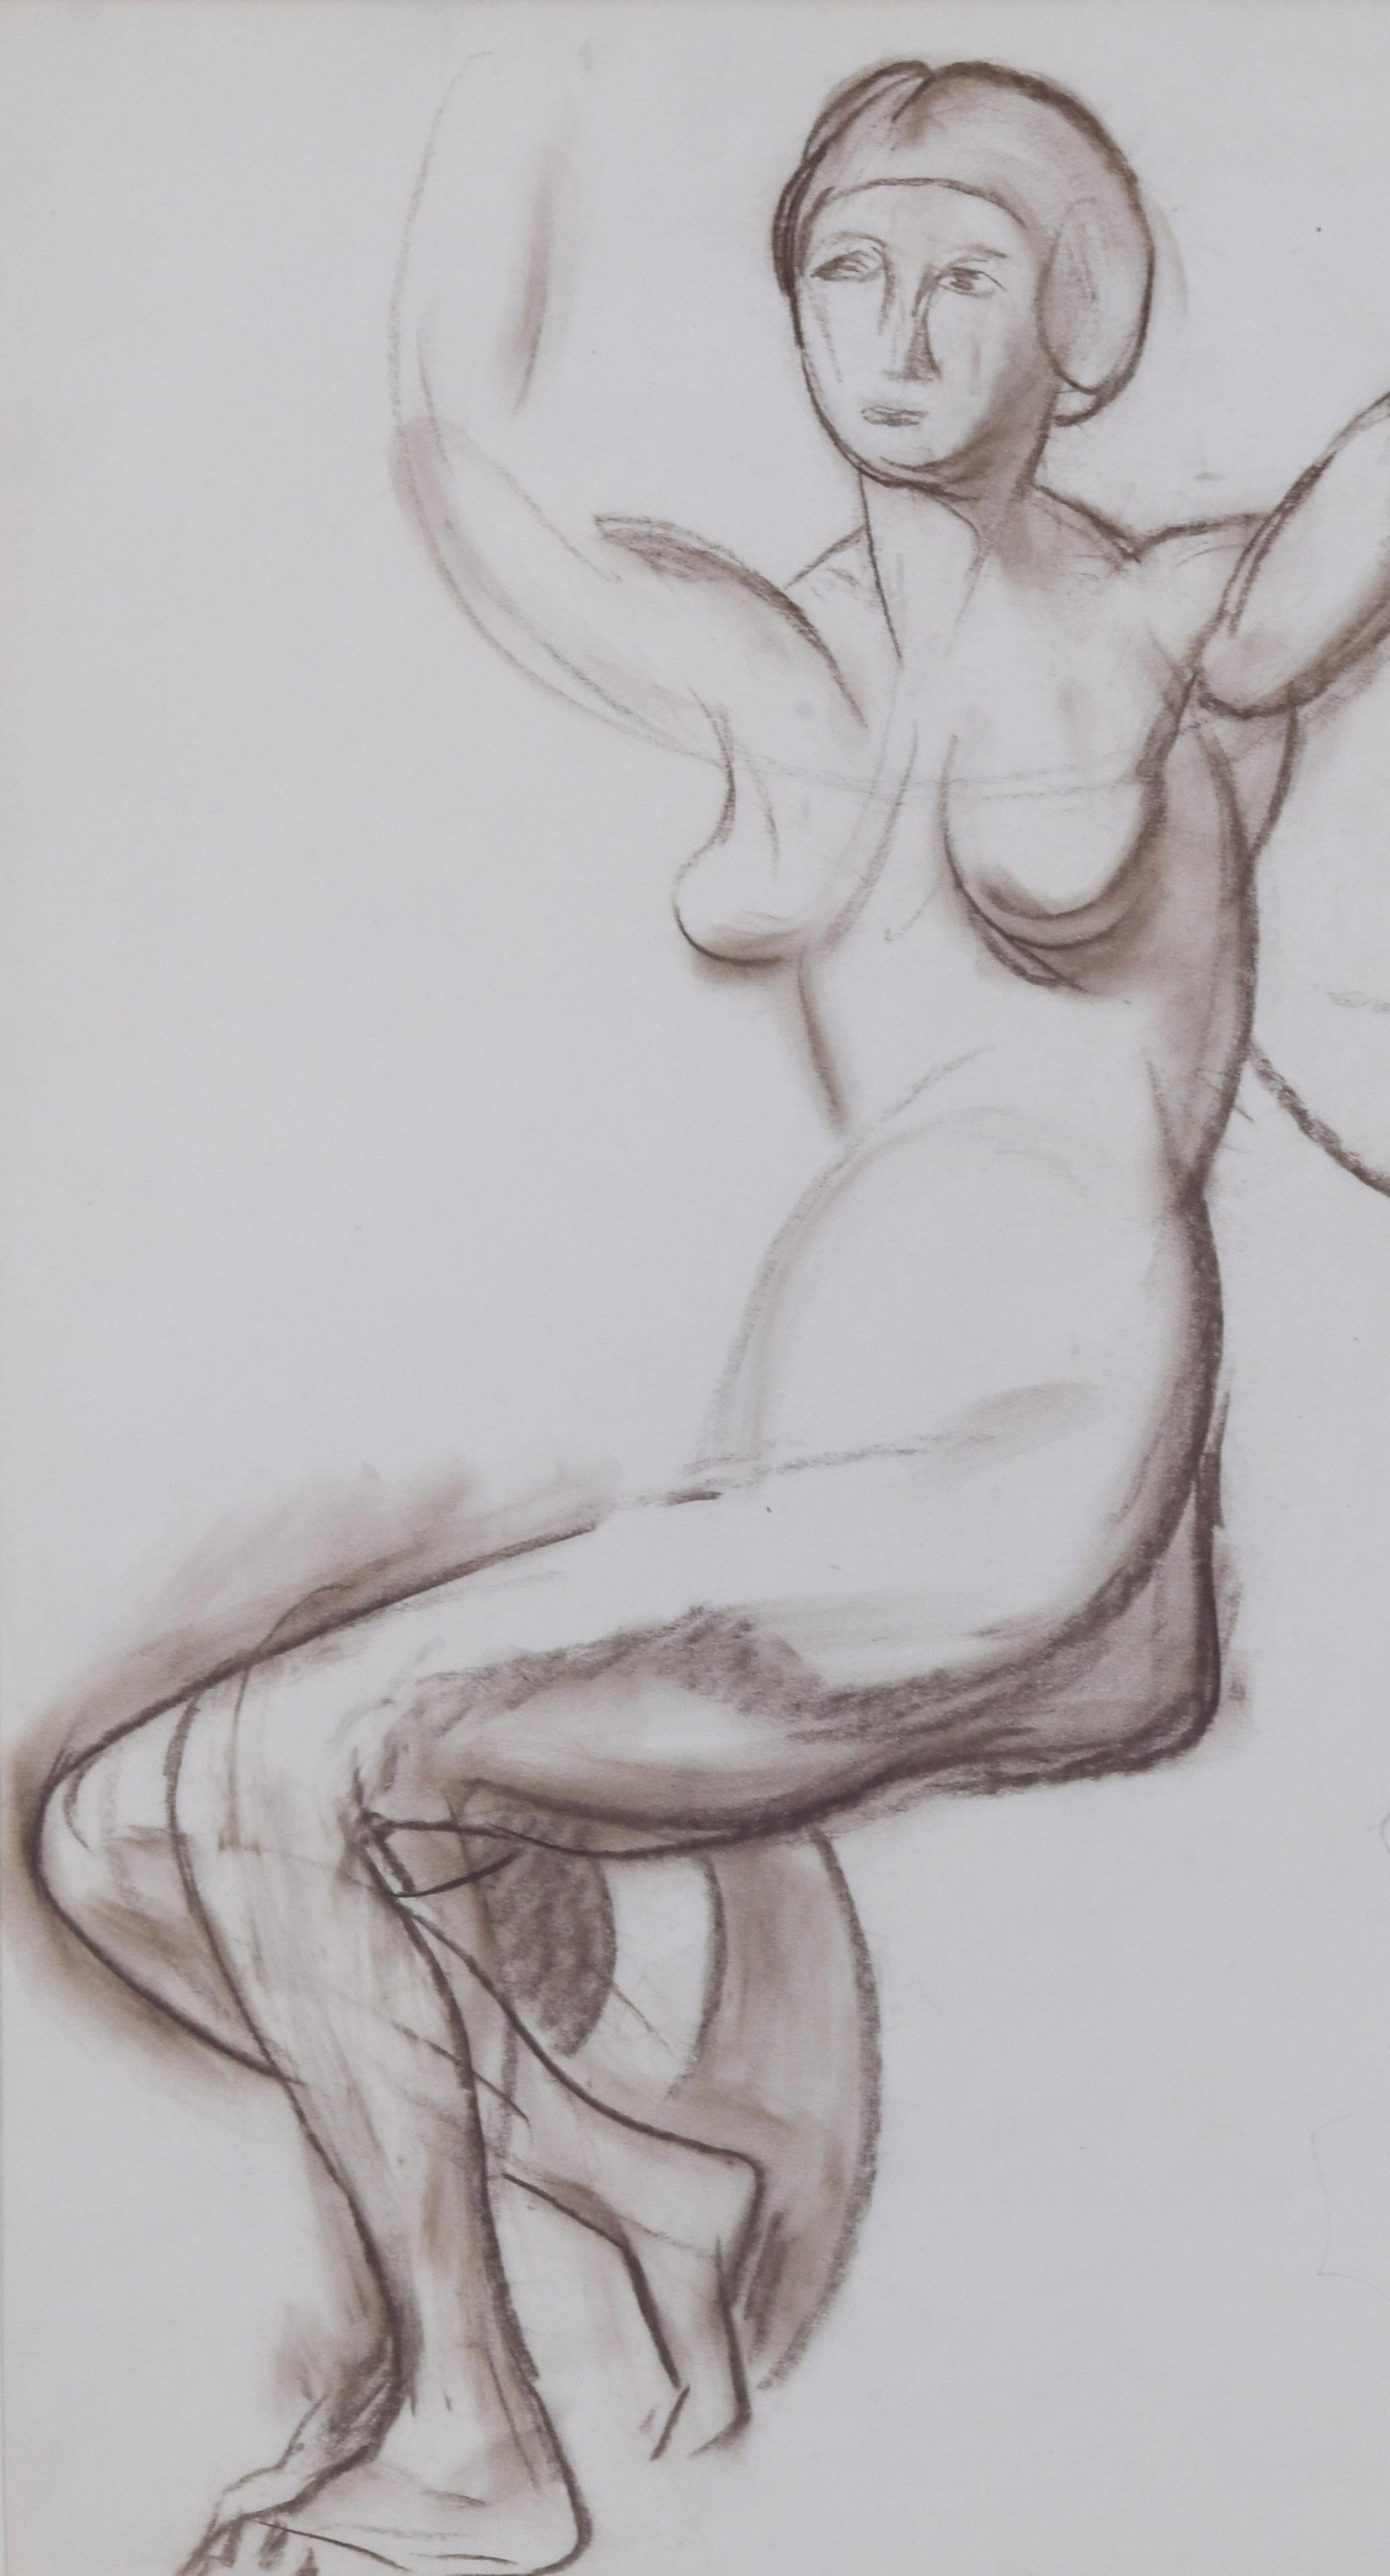 Female Nude Study
Graphite and crayon on wove paper, c. 1928
Signed with the Estate stamp 